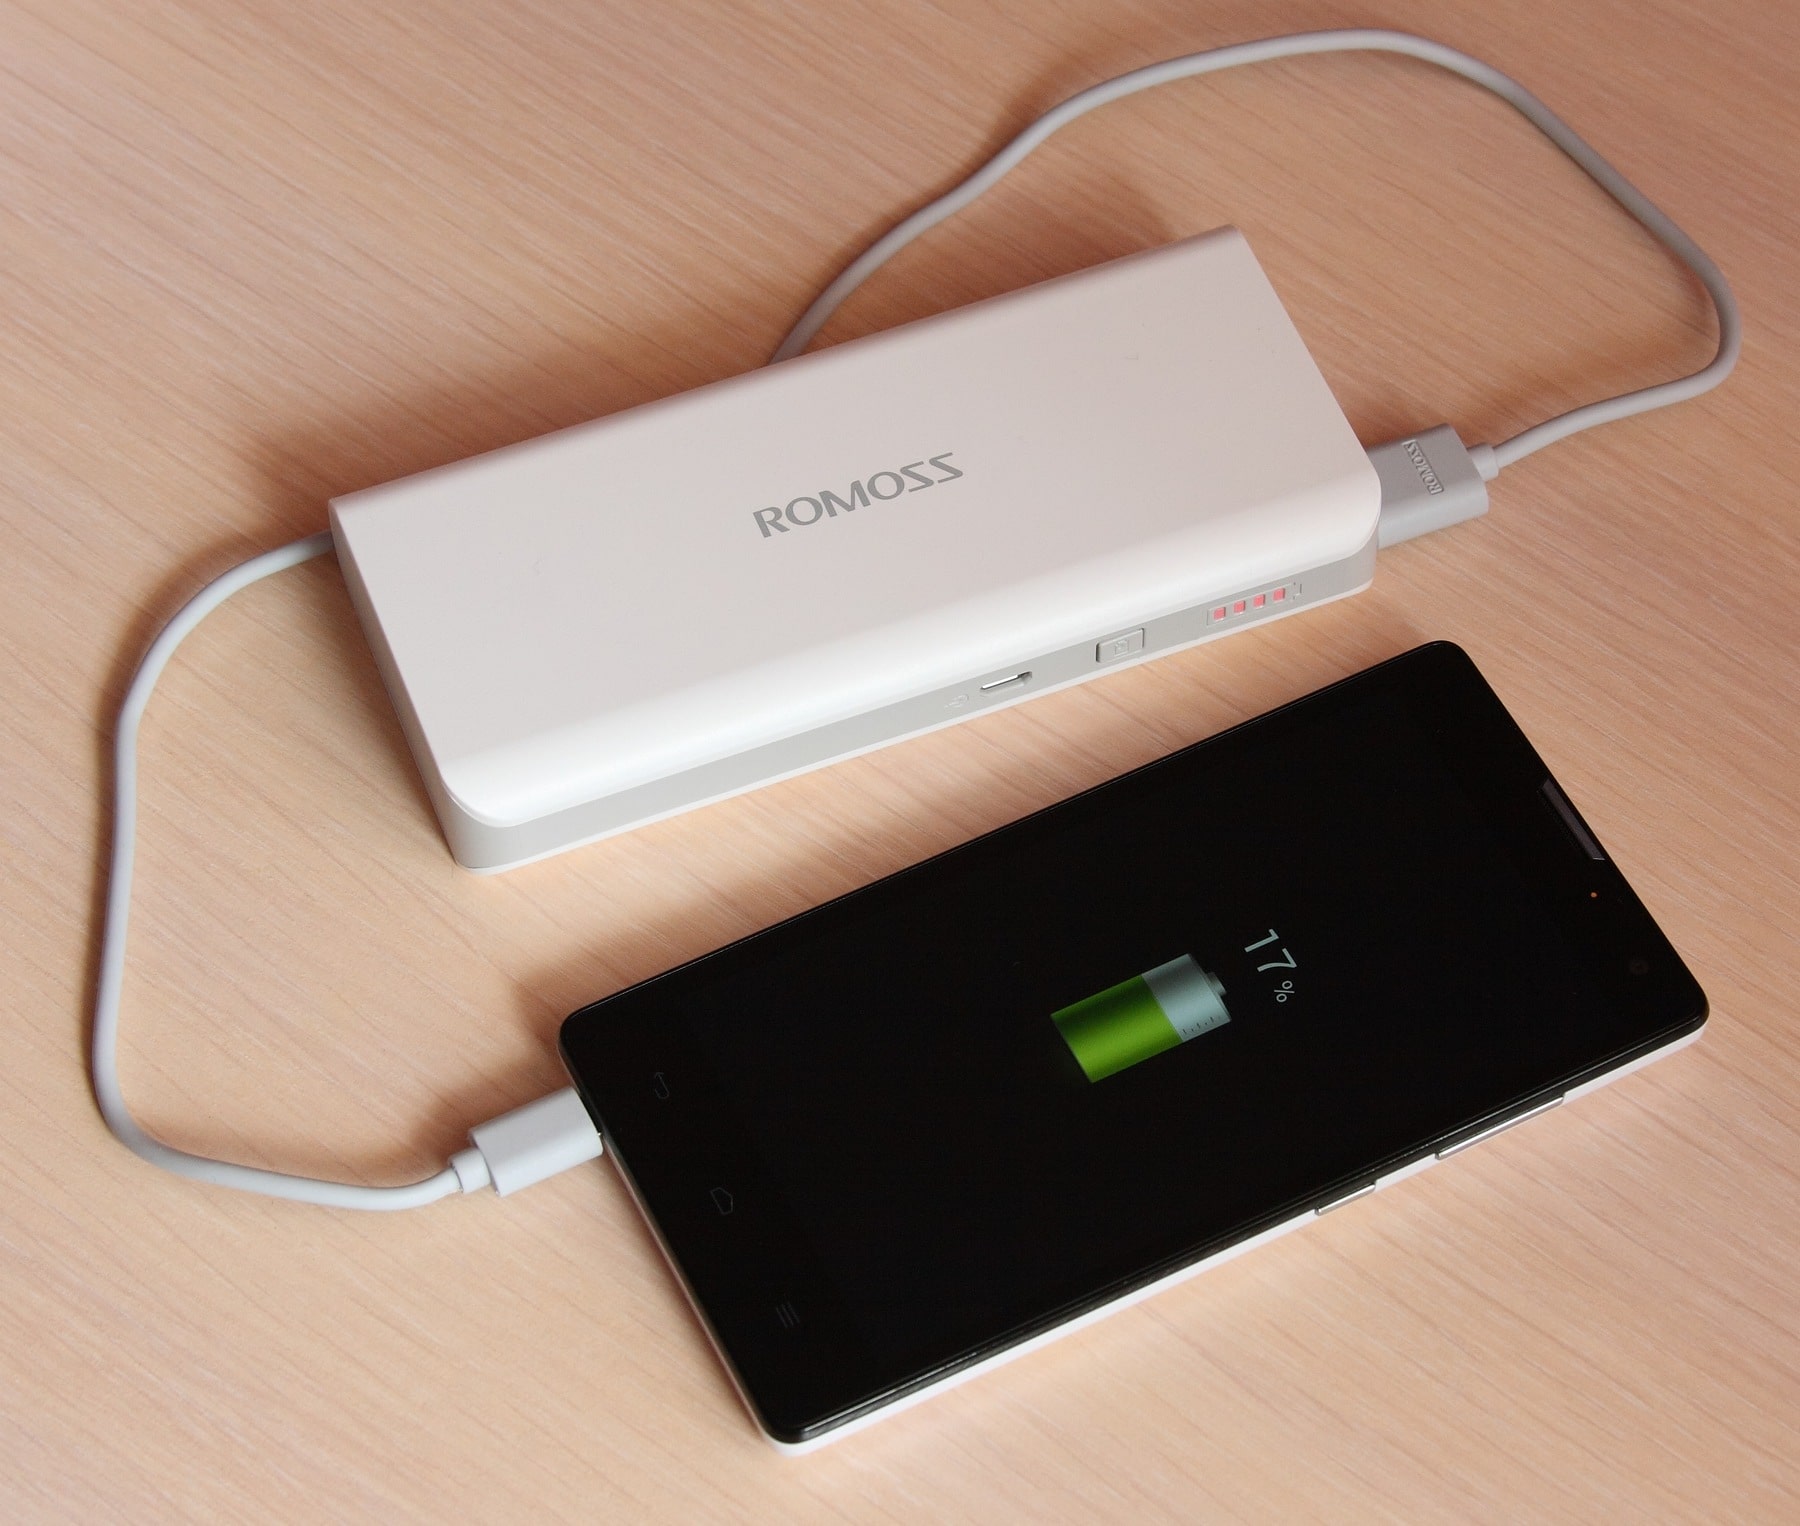 Power bank and smartphone